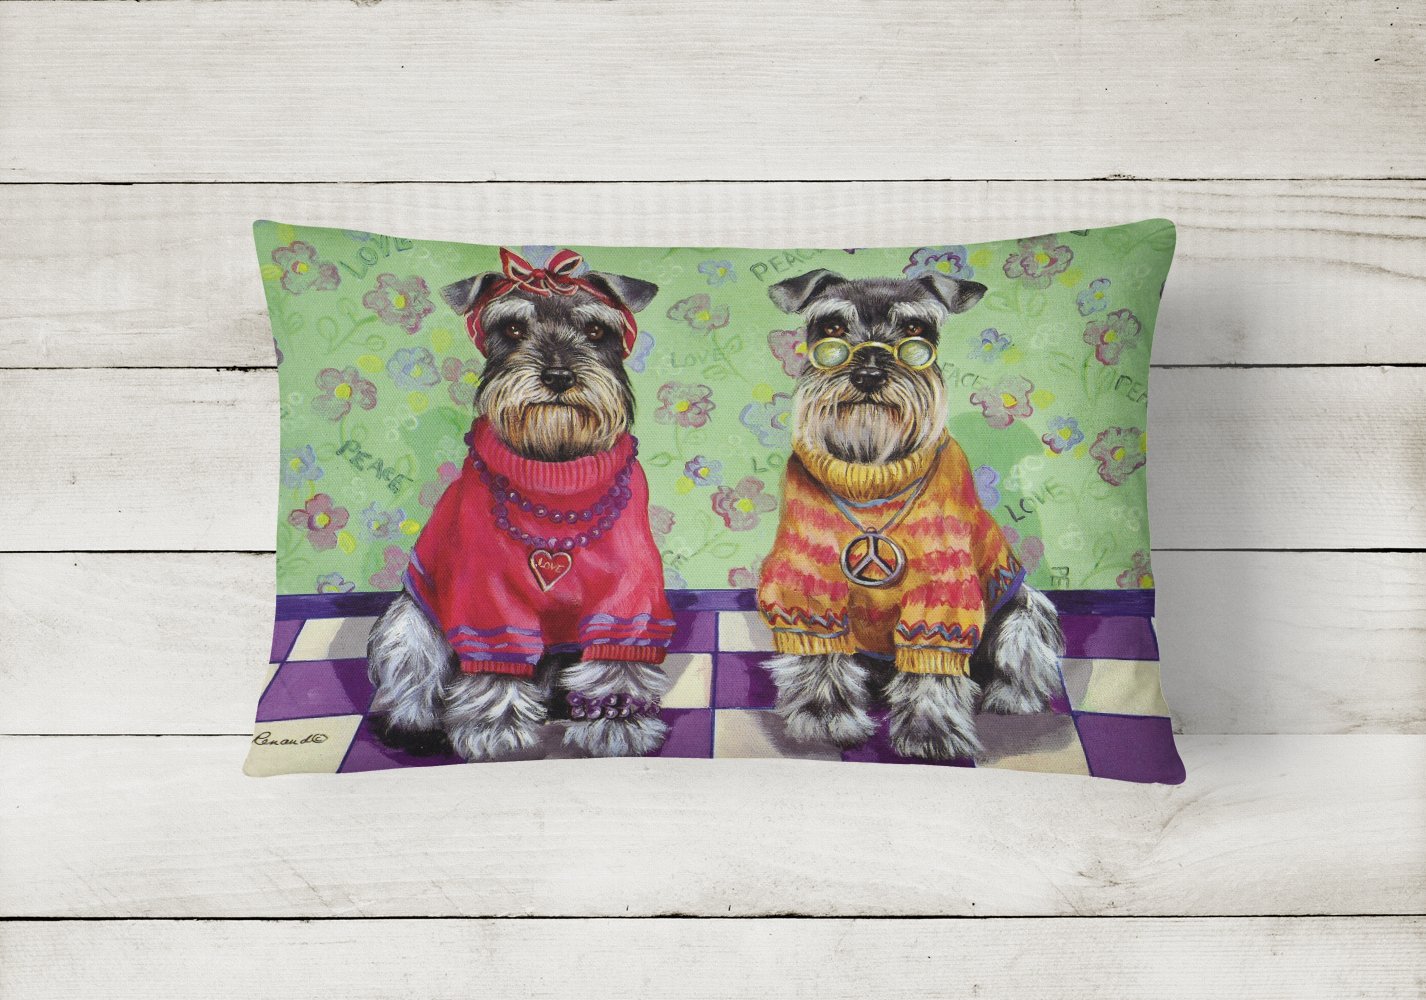 Buy this Schnauzer Love and Peace Canvas Fabric Decorative Pillow PPP3333PW1216